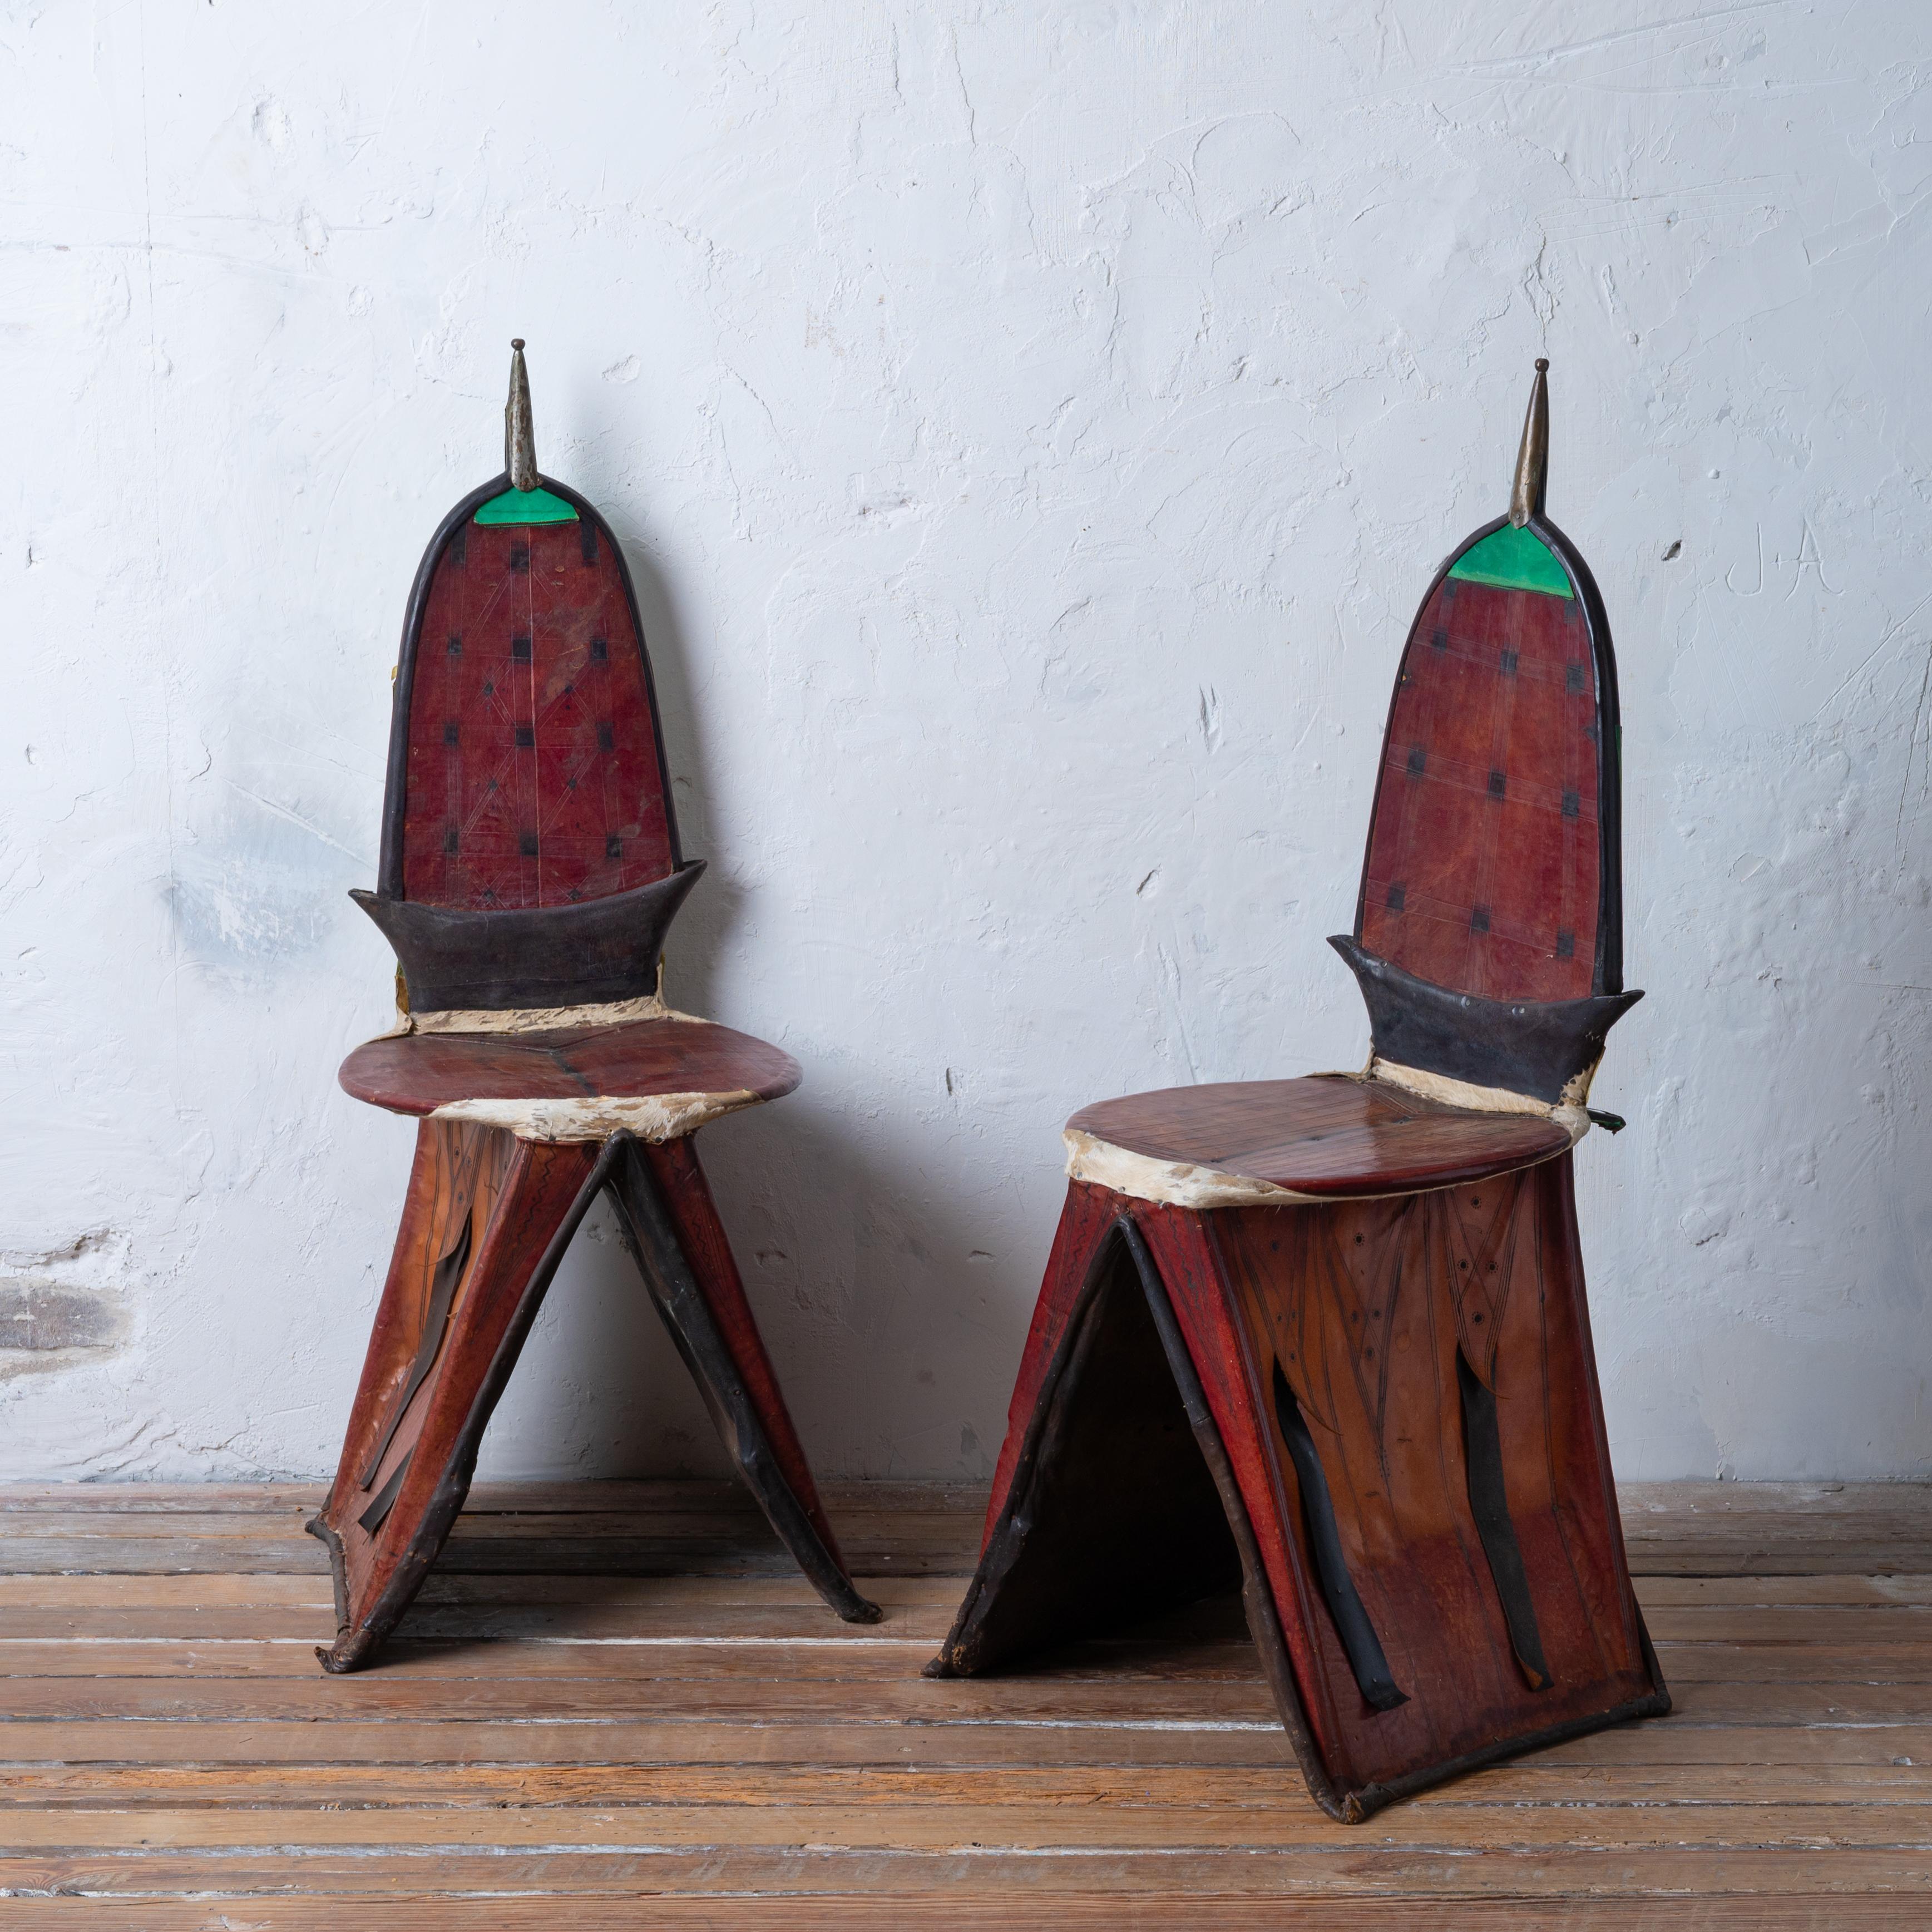 A pair of Tuareg Berber Tamzak camel saddle chairs, Niger Africa, early 20th century.

These saddle chairs are built of sturdy hardwood frames wrapped with various hides and leathers with tooling and dyes and cut metal.

18 ½ inches wide by 18